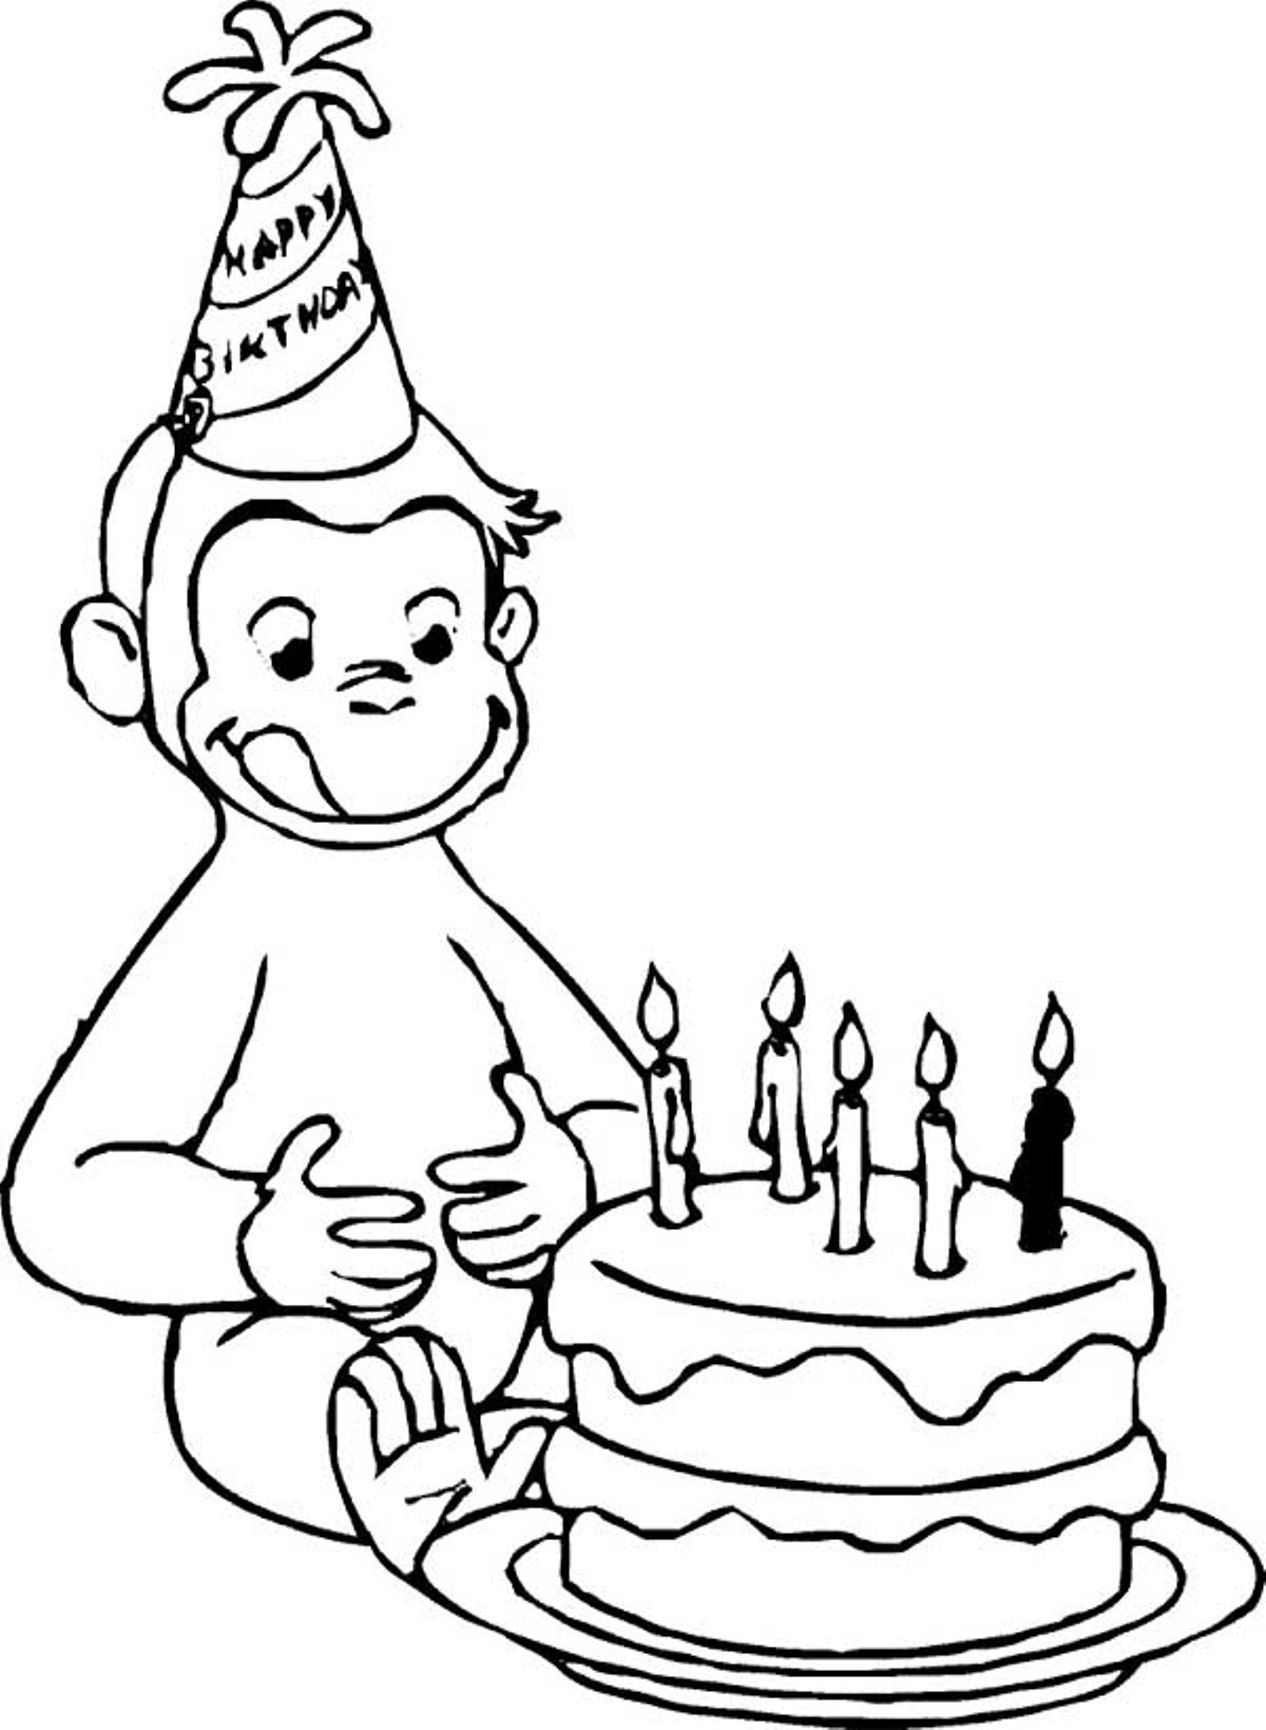 Download Birthday Curious George Coloring Pages Or Print Birthday ...